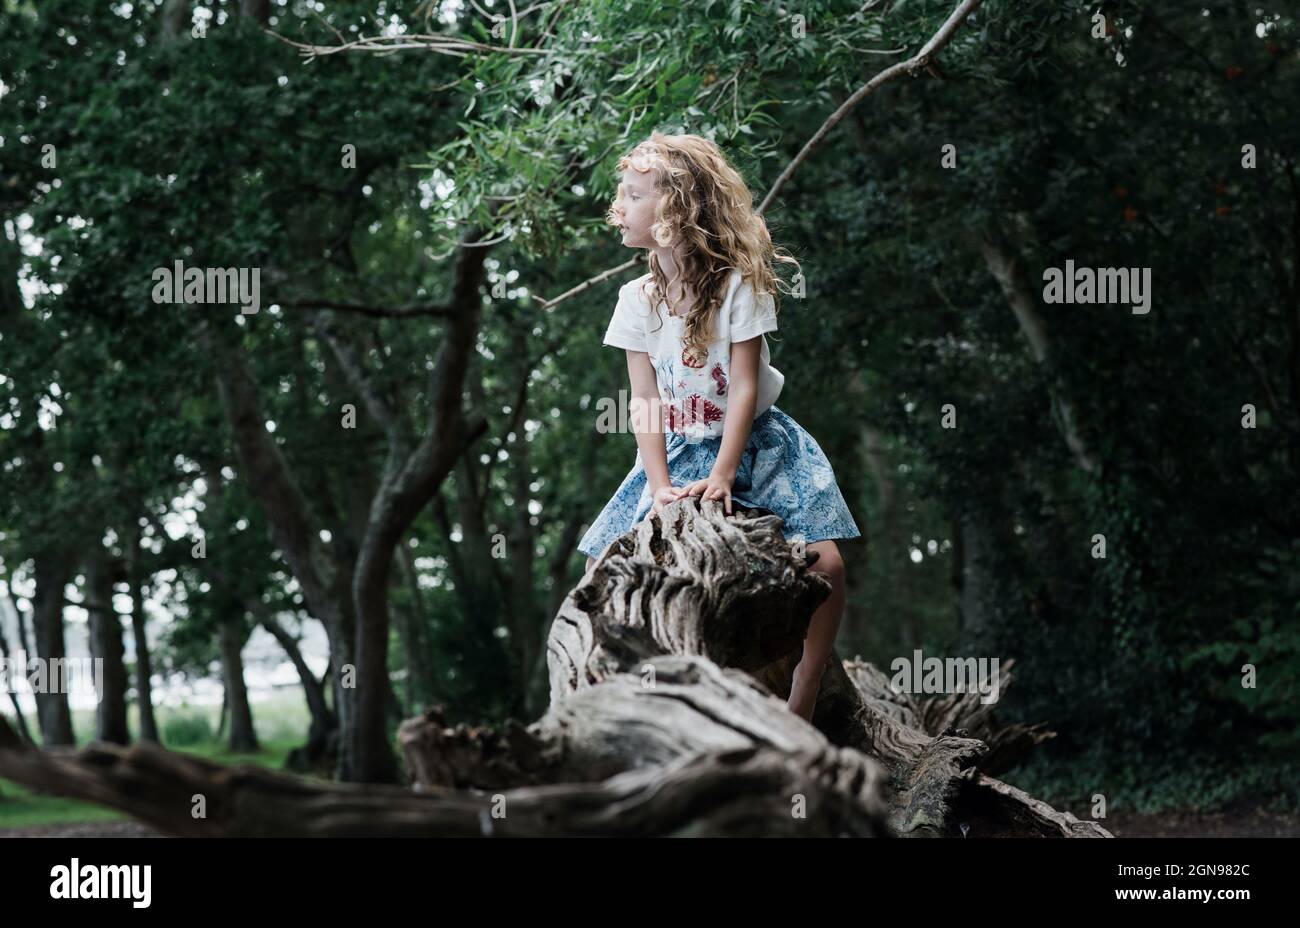 girl sat on a fallen tree barefoot enjoying nature in the forest Stock Photo